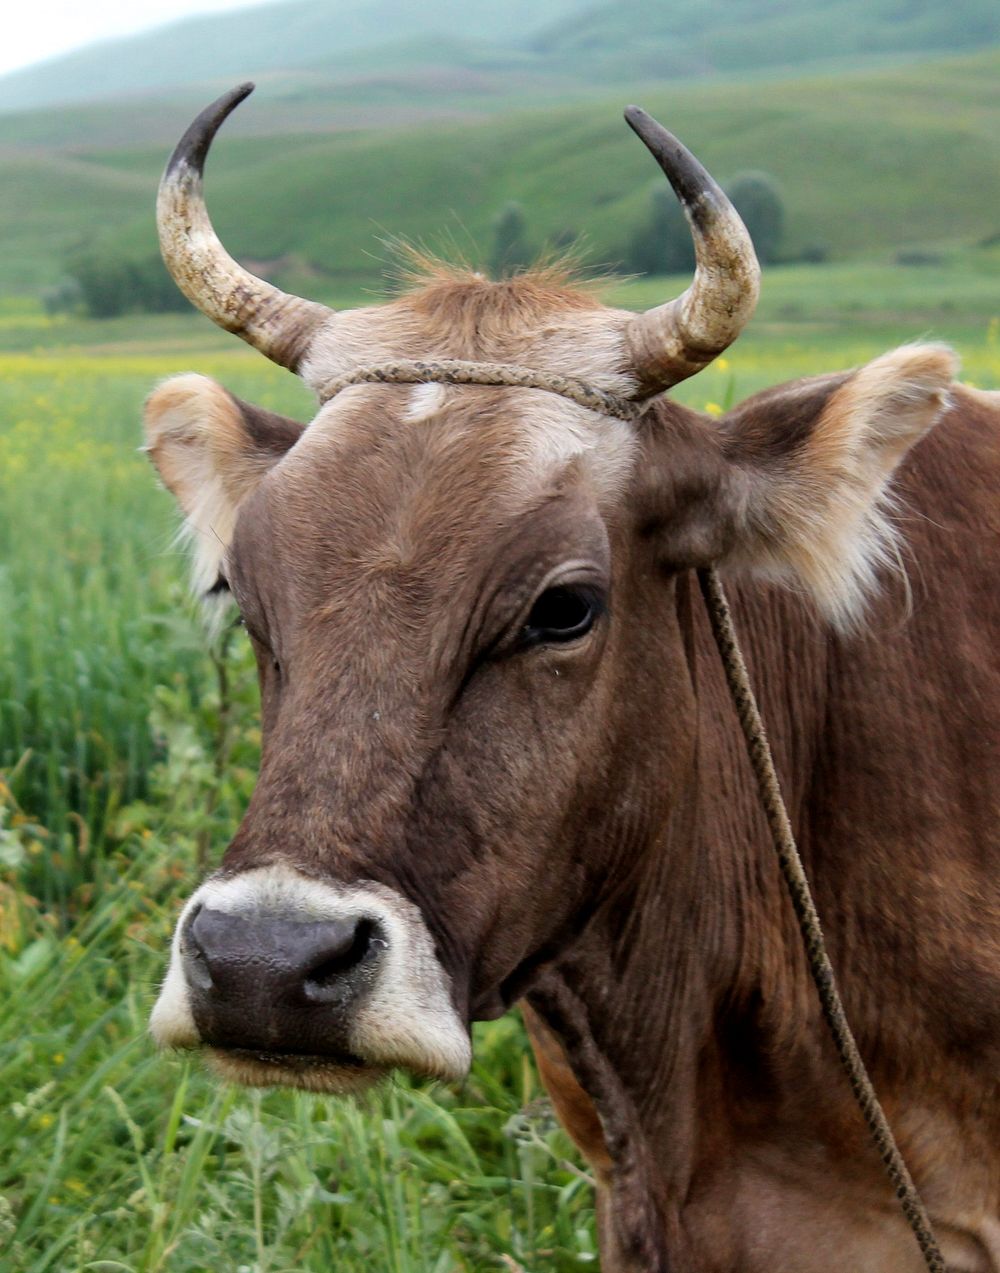 Free close up cow's face with harness image, public domain animal CC0 photo.